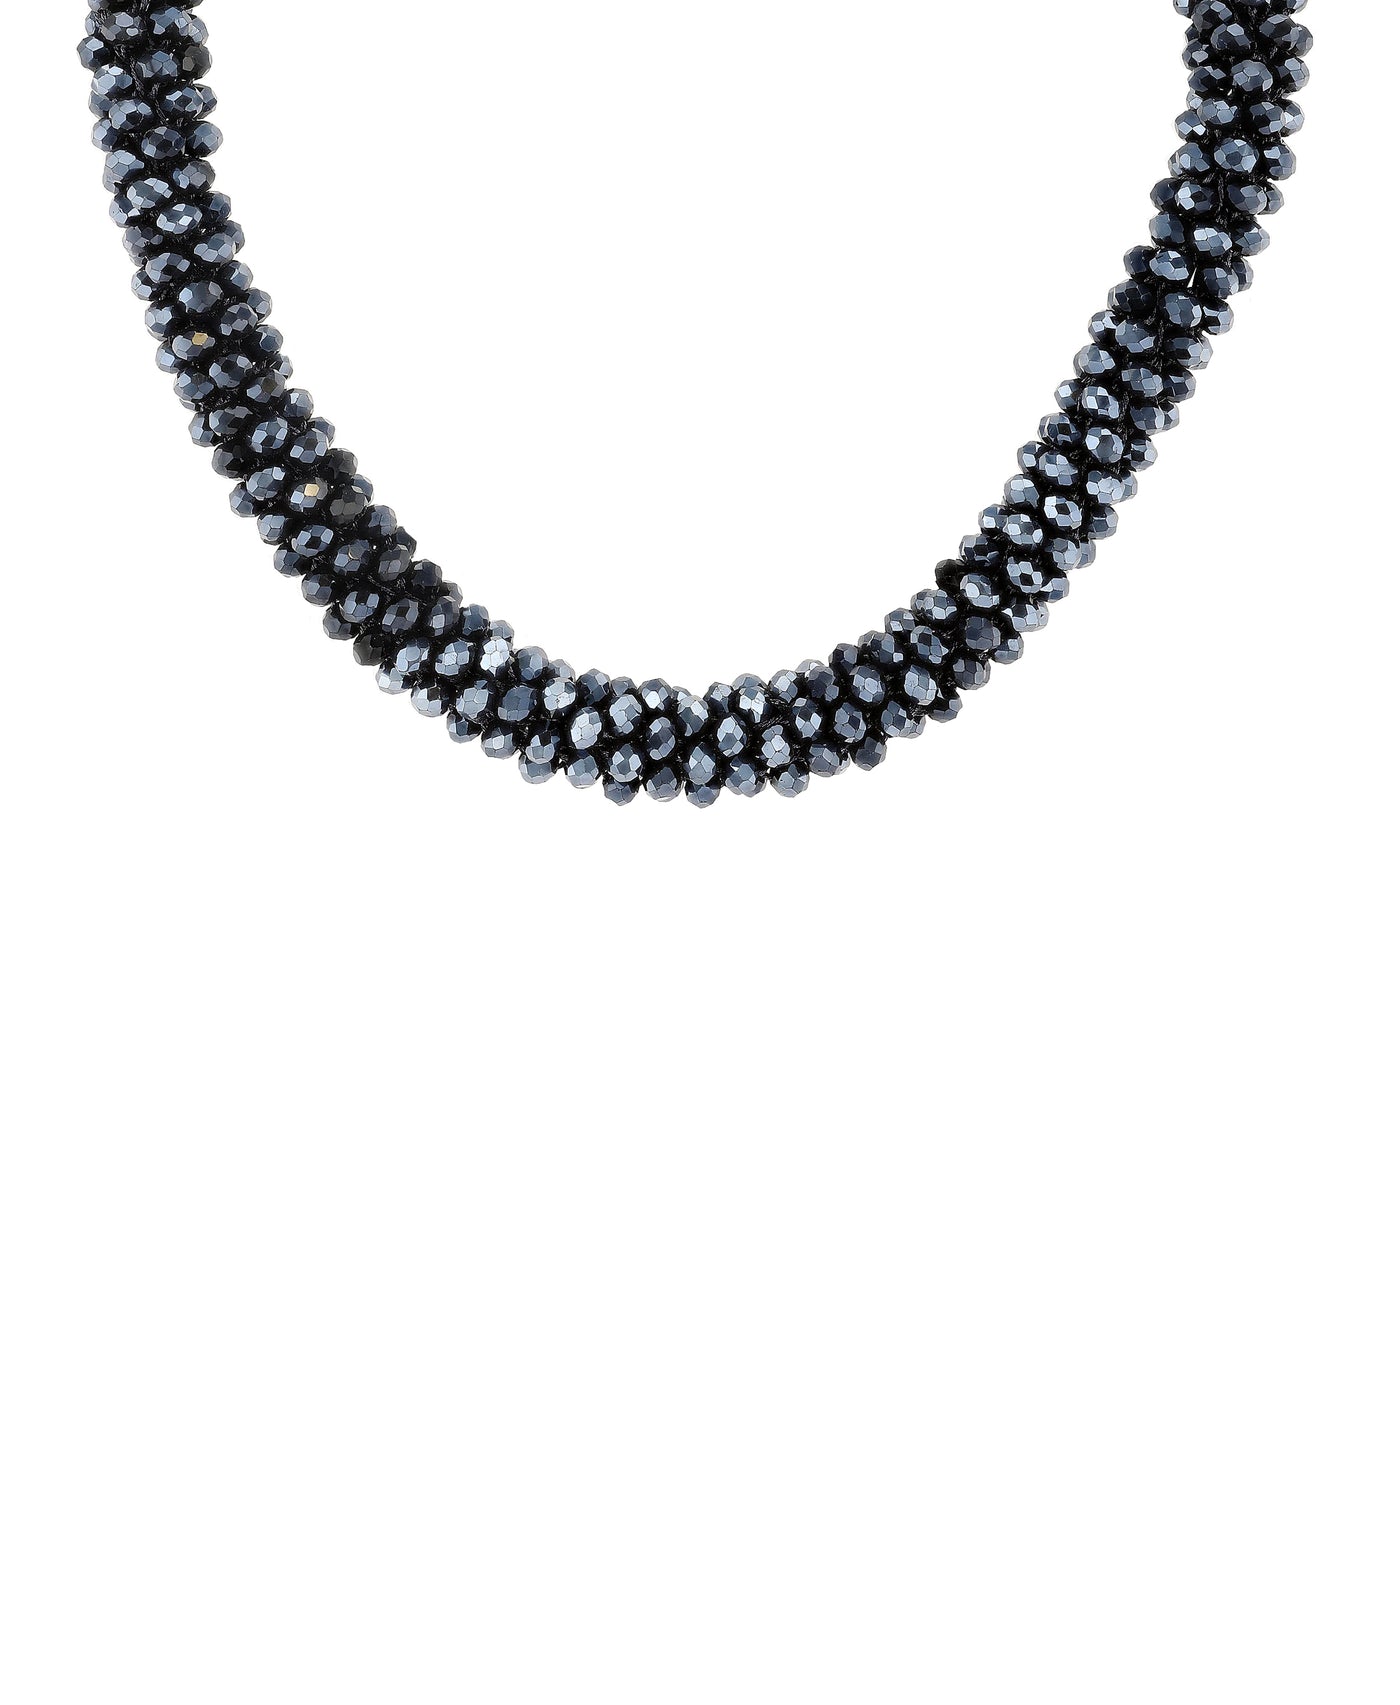 Beaded Collar Necklace image 1